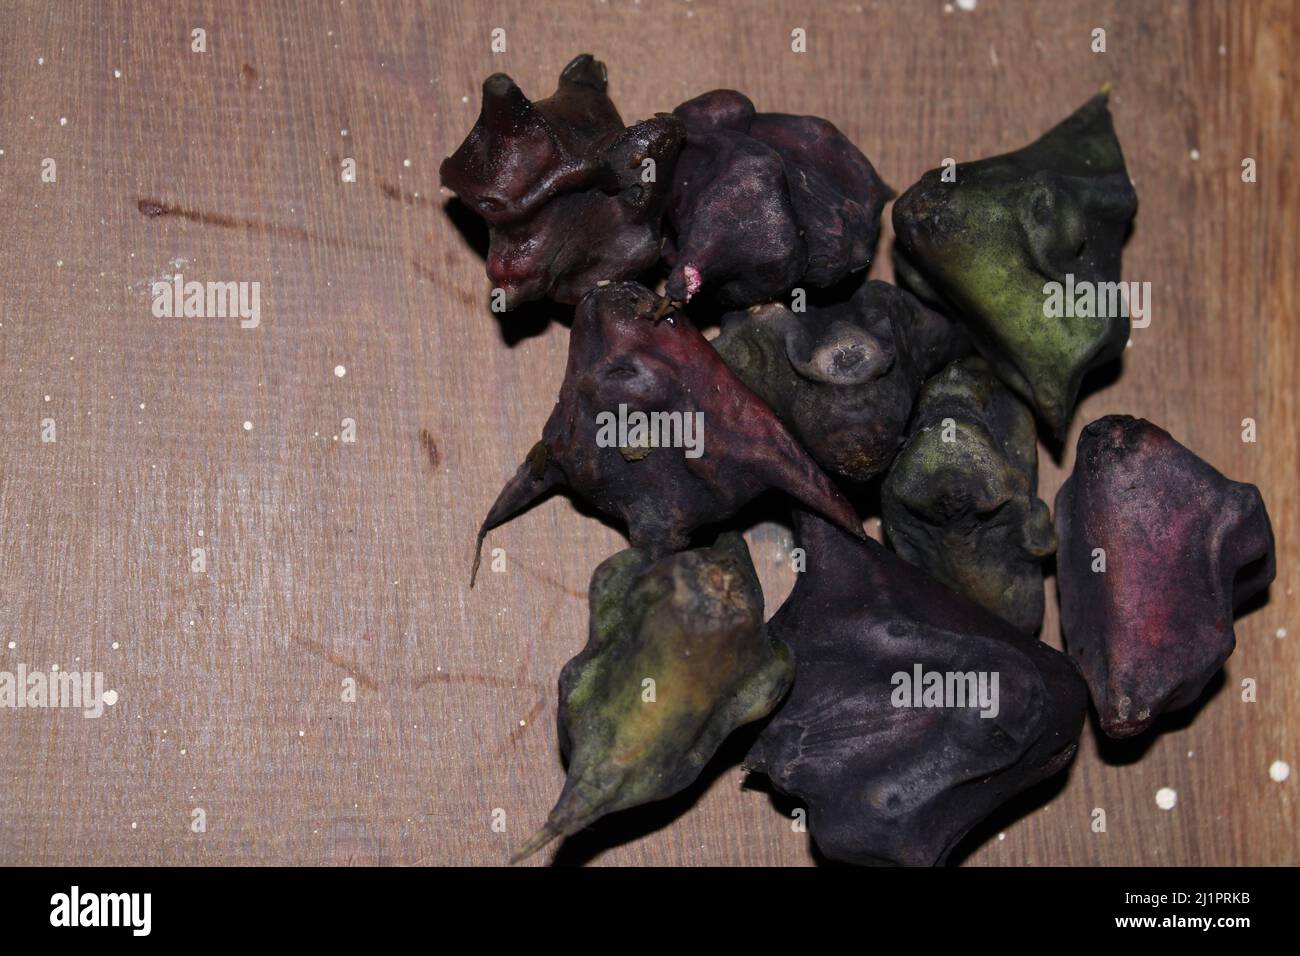 water caltrop fruit on the wooden background. Stock Photo